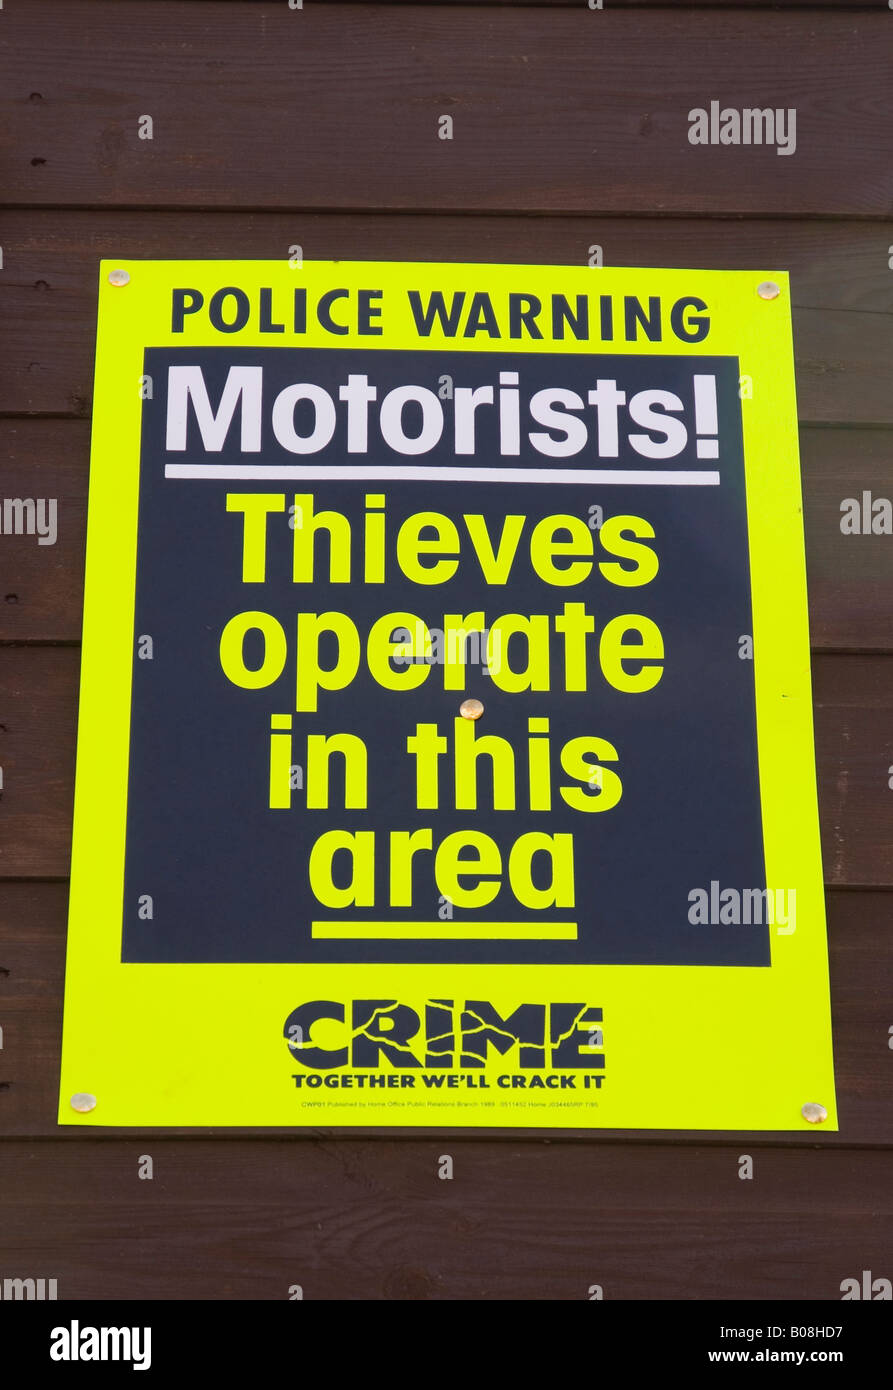 police sign warning of car thieves in the area Stock Photo